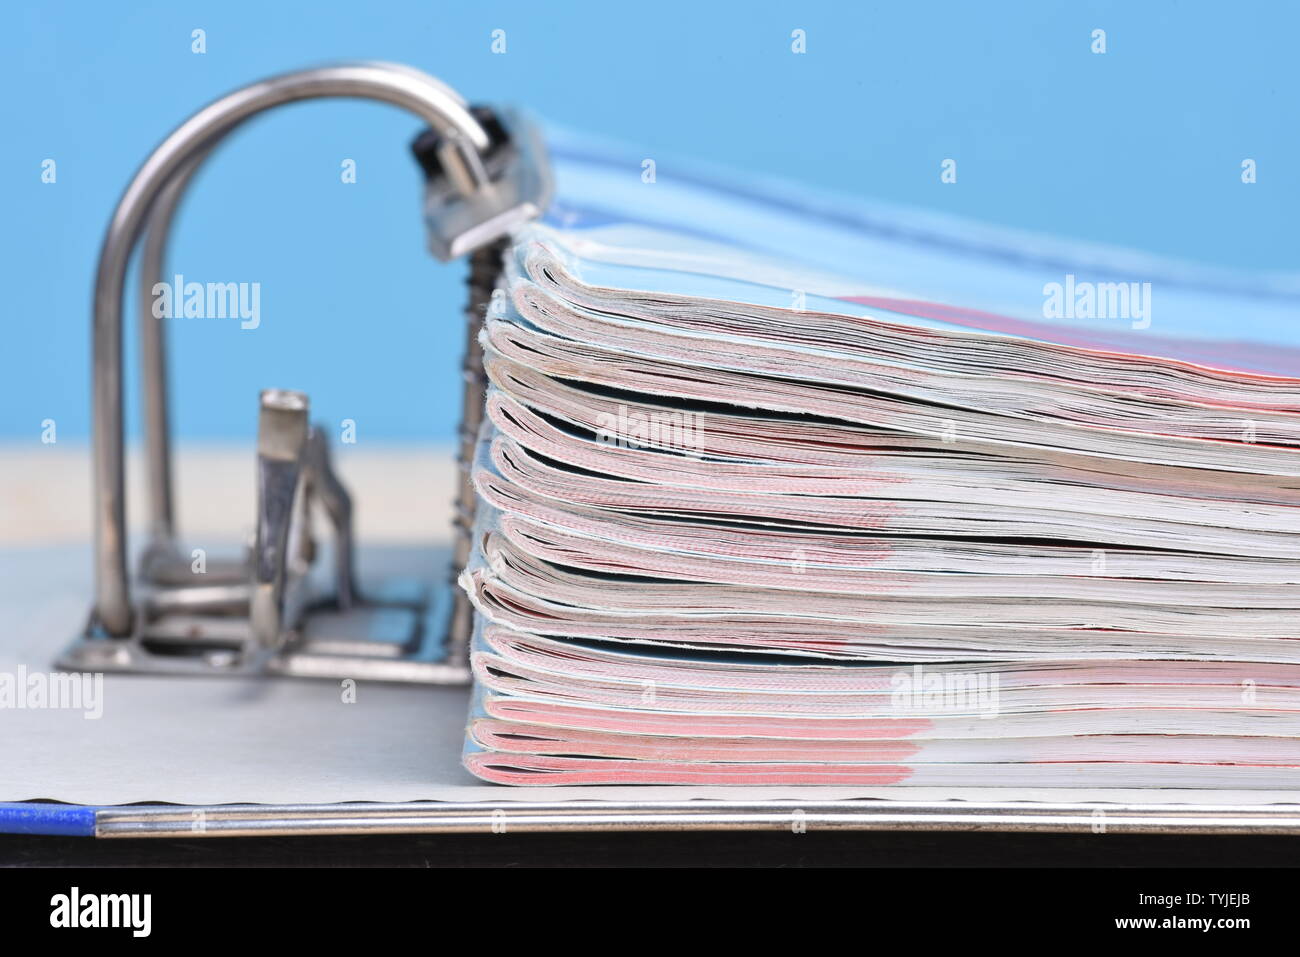 Close-up office ring binder with documentation Stock Photo